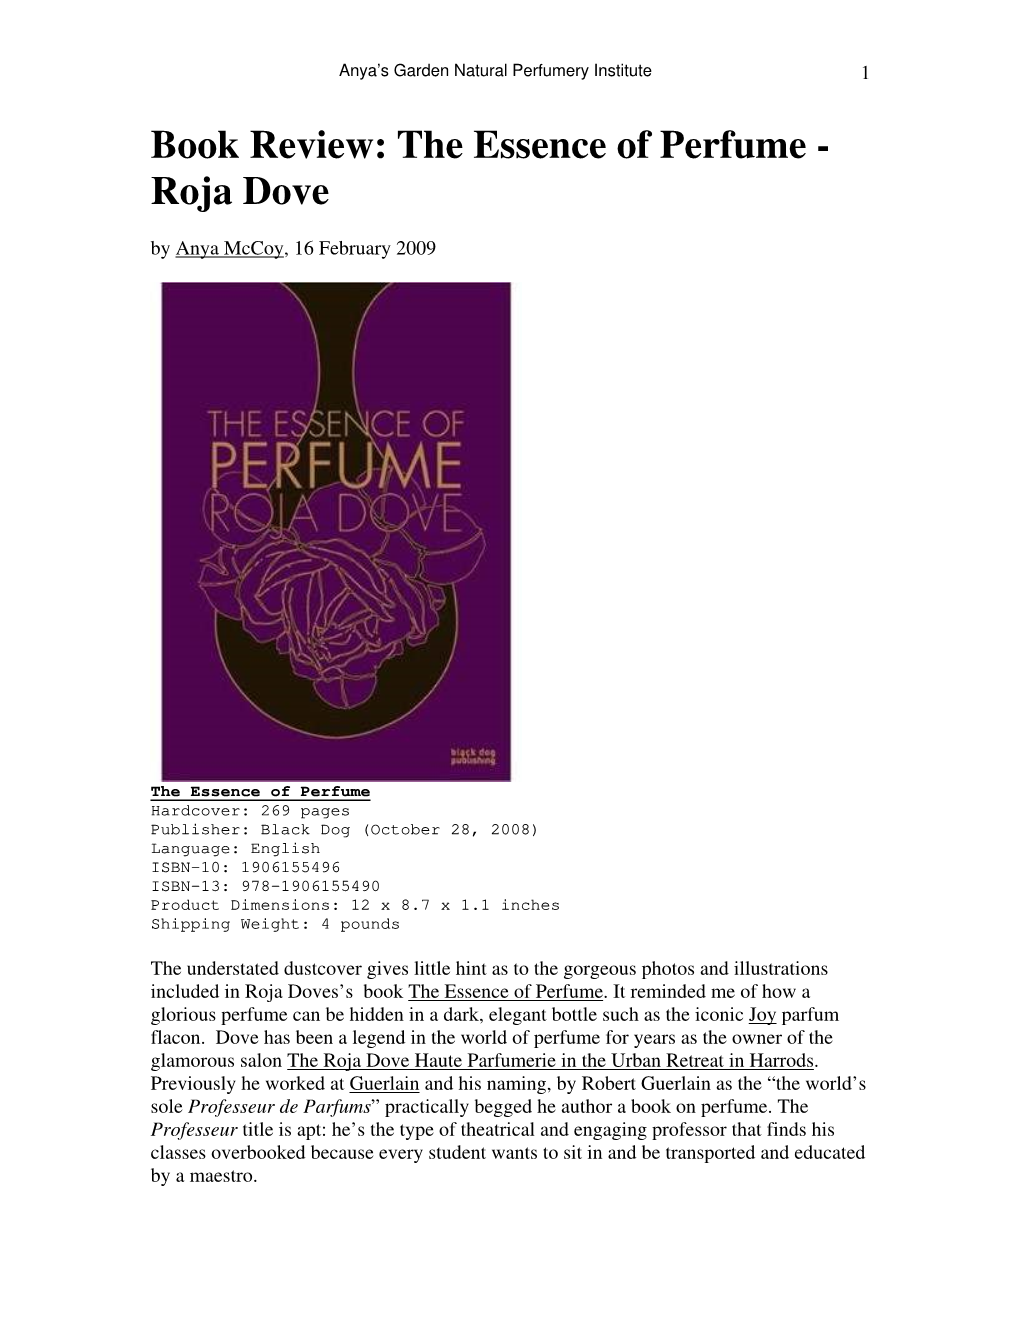 Mccoy Book Review the Essence of Perfume – Roja Dove